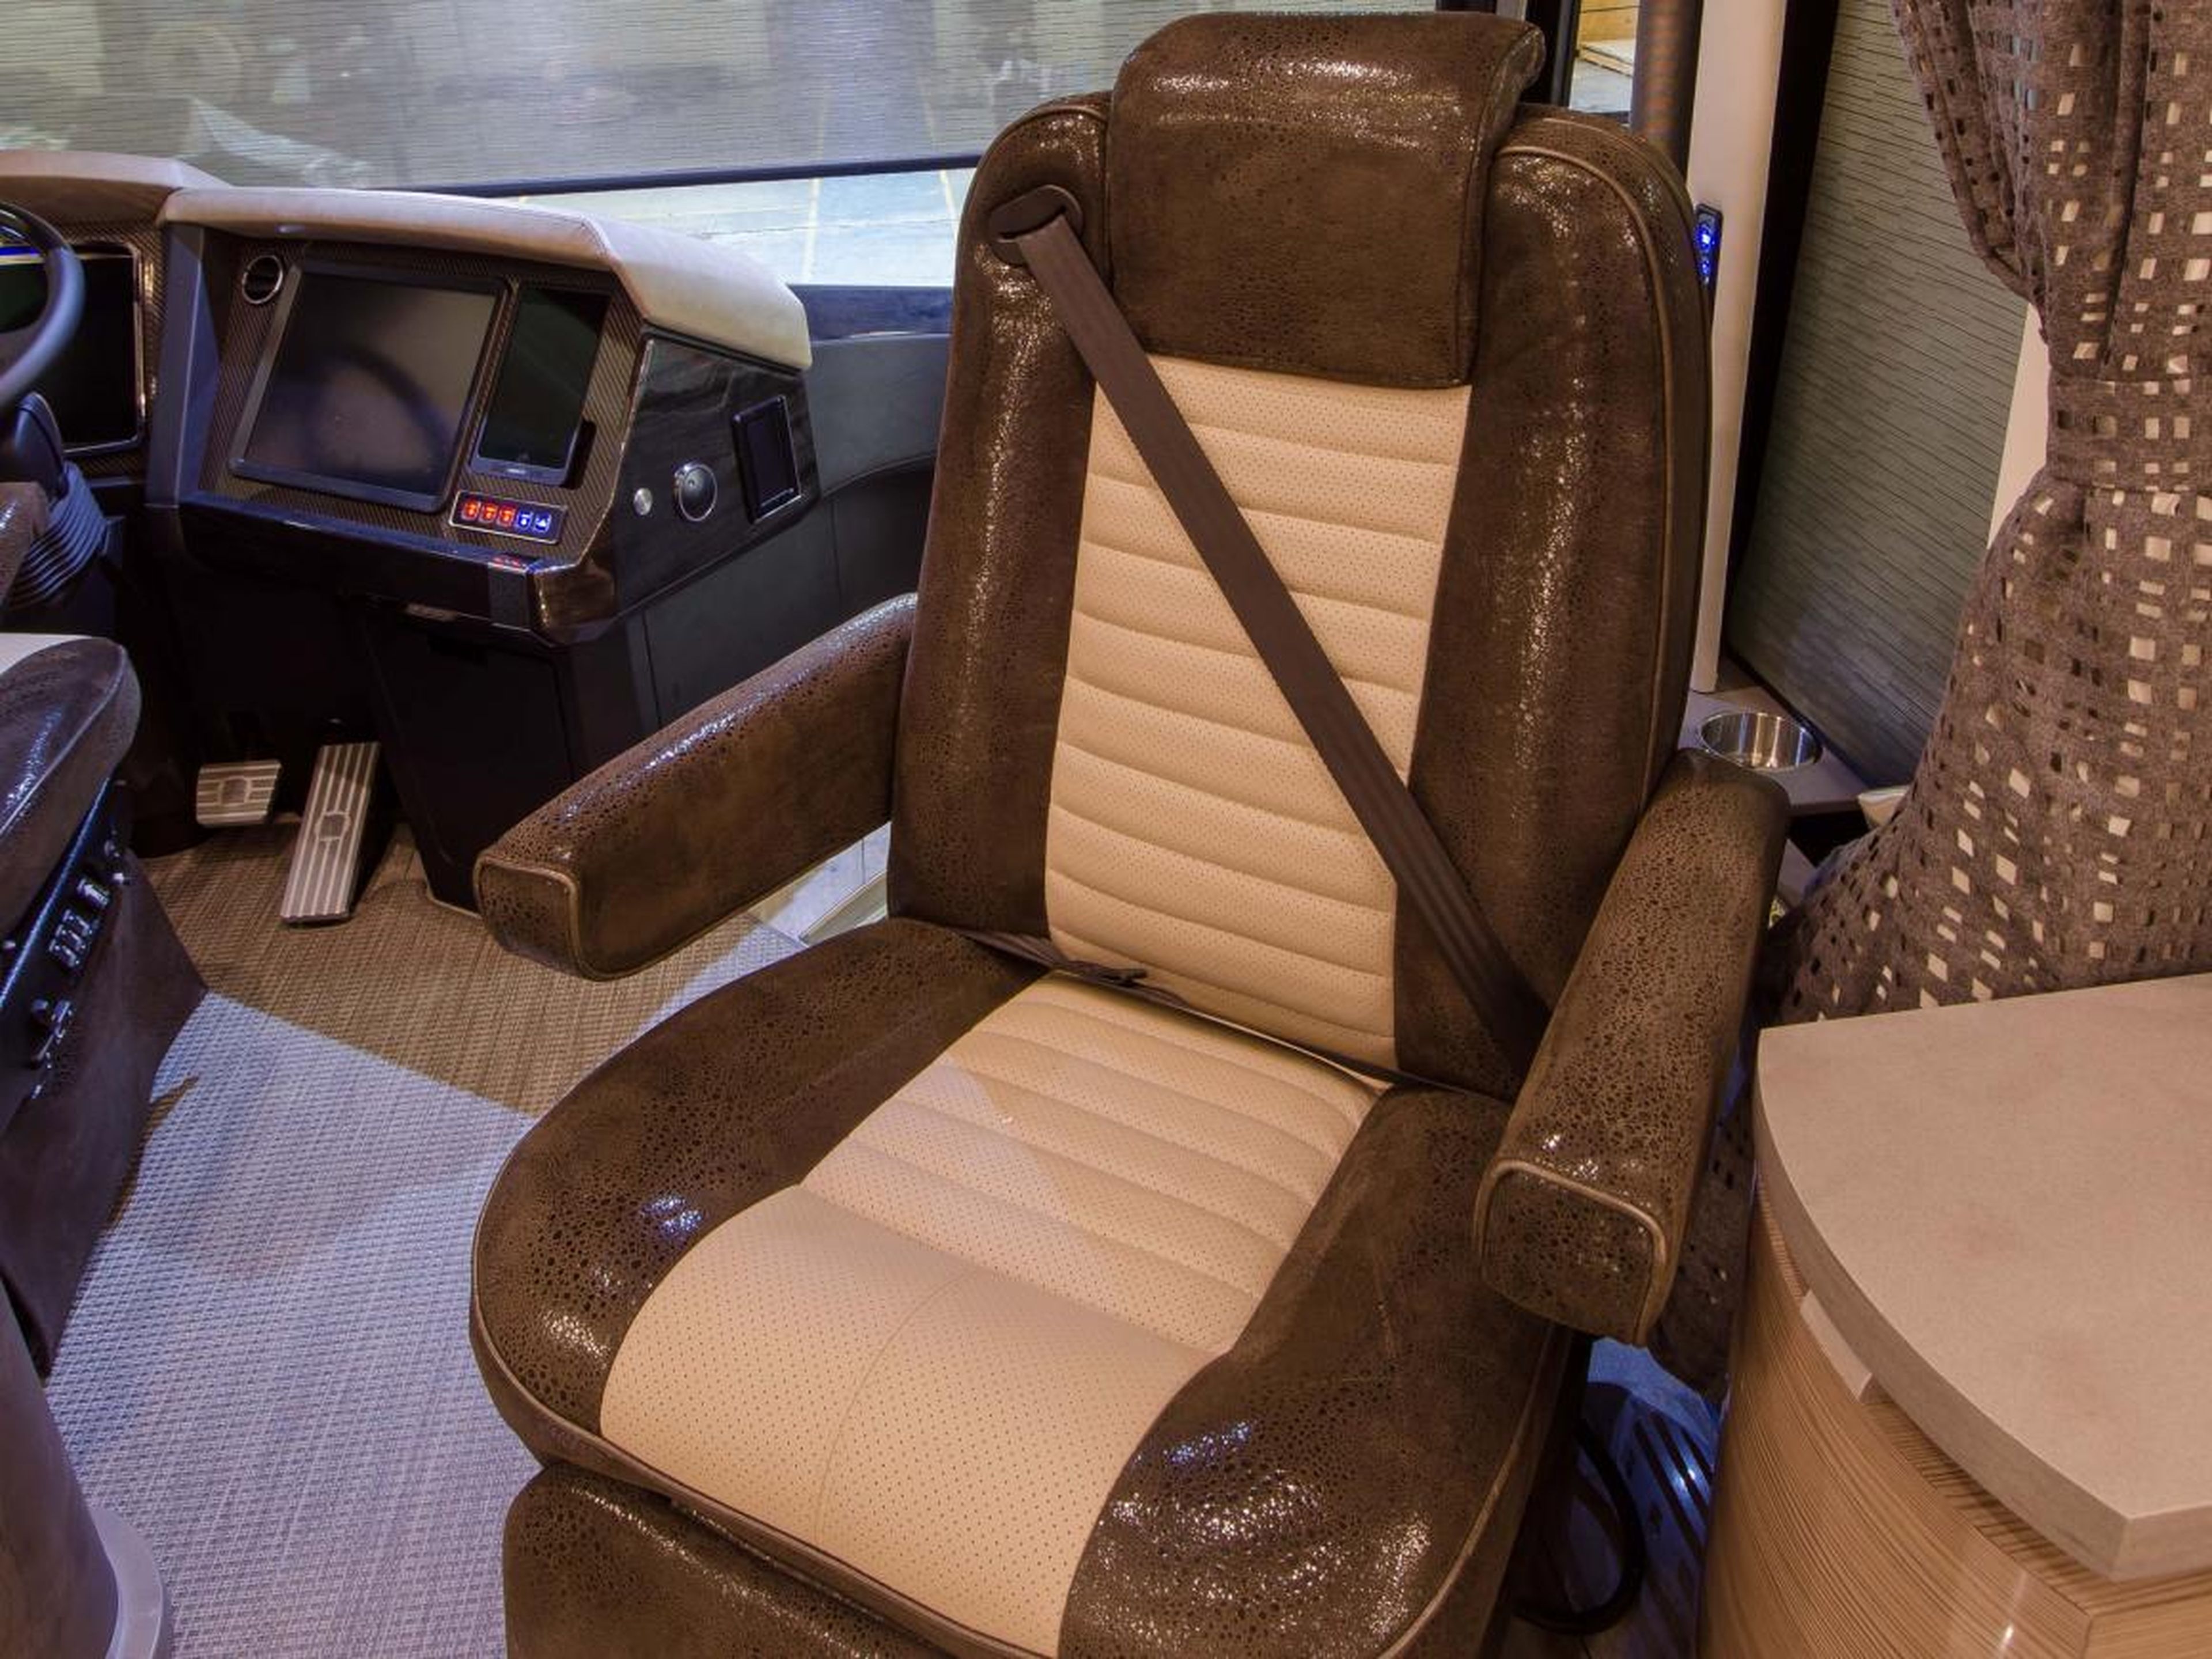 Passenger seat in the 2020 Newell Coach p50.